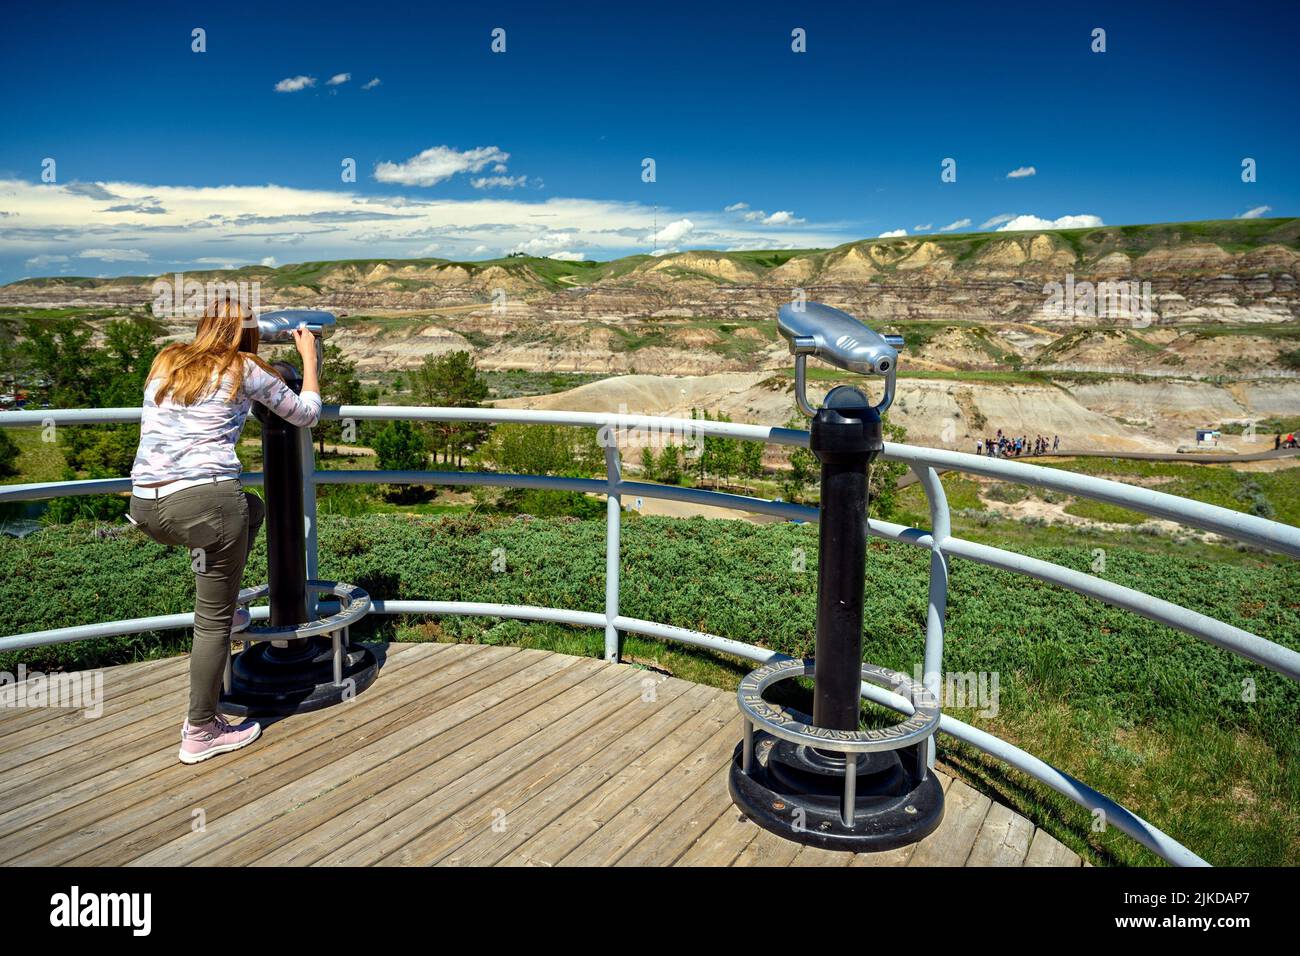 Tourists observing the landscape of the Canadian Badlands via binocular in Drumheller, the dinosaur capital of the world, Alberta, Canada. Stock Photo